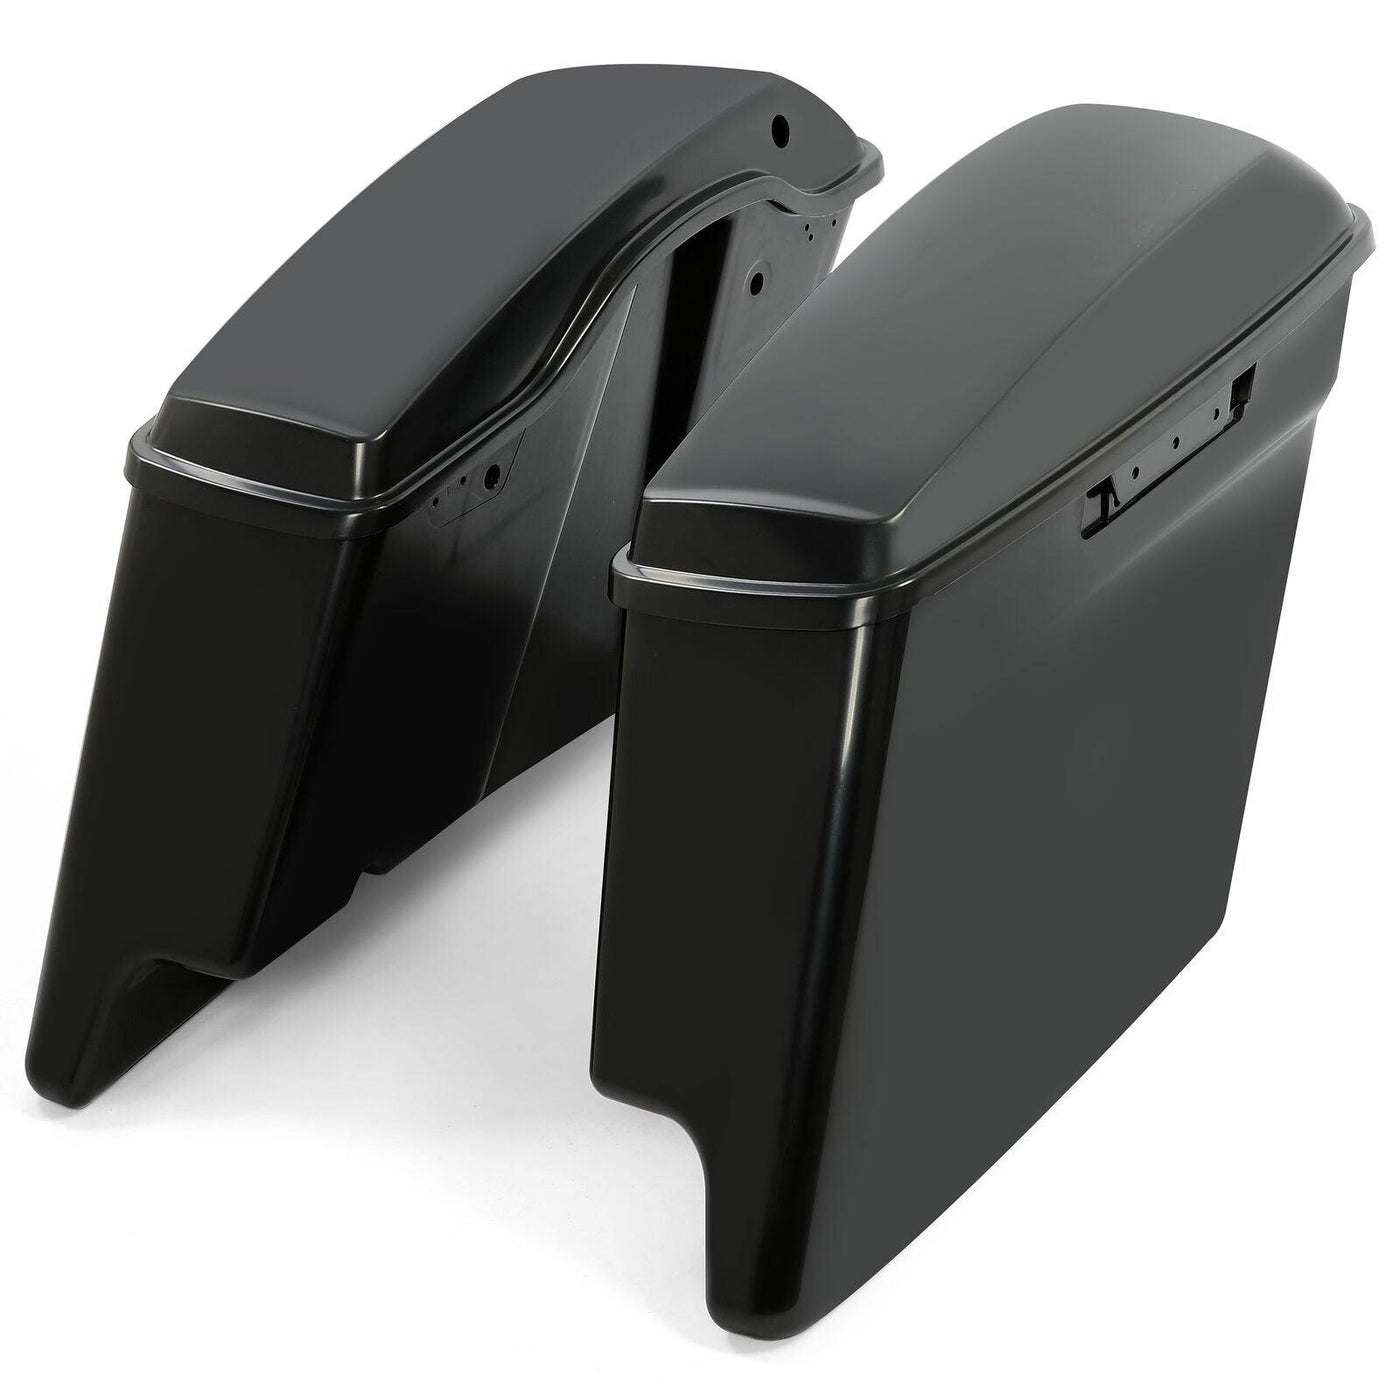 Unpainted 5" Stretched Extended Hard Saddle bags For Harley Road King 2014-2020 - Moto Life Products